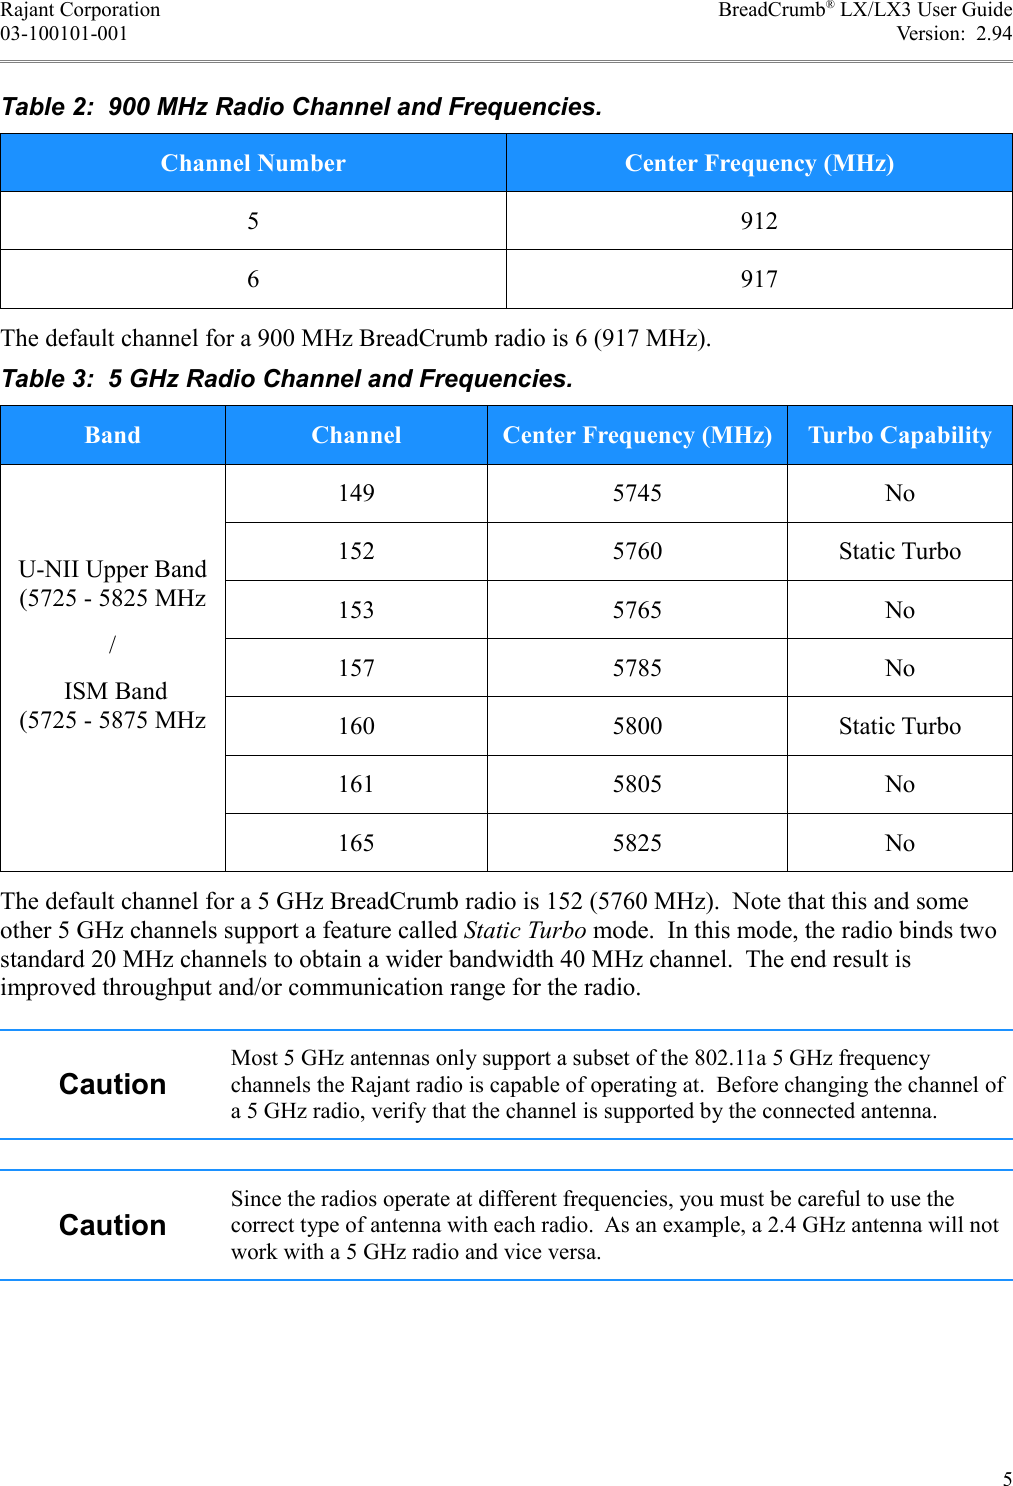 Rajant Corporation BreadCrumb® LX/LX3 User Guide03-100101-001 Version:  2.94Table 2:  900 MHz Radio Channel and Frequencies.Channel Number Center Frequency (MHz)5 9126 917The default channel for a 900 MHz BreadCrumb radio is 6 (917 MHz).Table 3:  5 GHz Radio Channel and Frequencies.Band Channel Center Frequency (MHz) Turbo CapabilityU-NII Upper Band (5725 - 5825 MHz/ ISM Band (5725 - 5875 MHz149 5745 No152 5760 Static Turbo153 5765 No157 5785 No160 5800 Static Turbo161 5805 No165 5825 NoThe default channel for a 5 GHz BreadCrumb radio is 152 (5760 MHz).  Note that this and some other 5 GHz channels support a feature called Static Turbo mode.  In this mode, the radio binds two standard 20 MHz channels to obtain a wider bandwidth 40 MHz channel.  The end result is improved throughput and/or communication range for the radio. Most 5 GHz antennas only support a subset of the 802.11a 5 GHz frequency channels the Rajant radio is capable of operating at.  Before changing the channel of a 5 GHz radio, verify that the channel is supported by the connected antenna.Since the radios operate at different frequencies, you must be careful to use the correct type of antenna with each radio.  As an example, a 2.4 GHz antenna will not work with a 5 GHz radio and vice versa.5